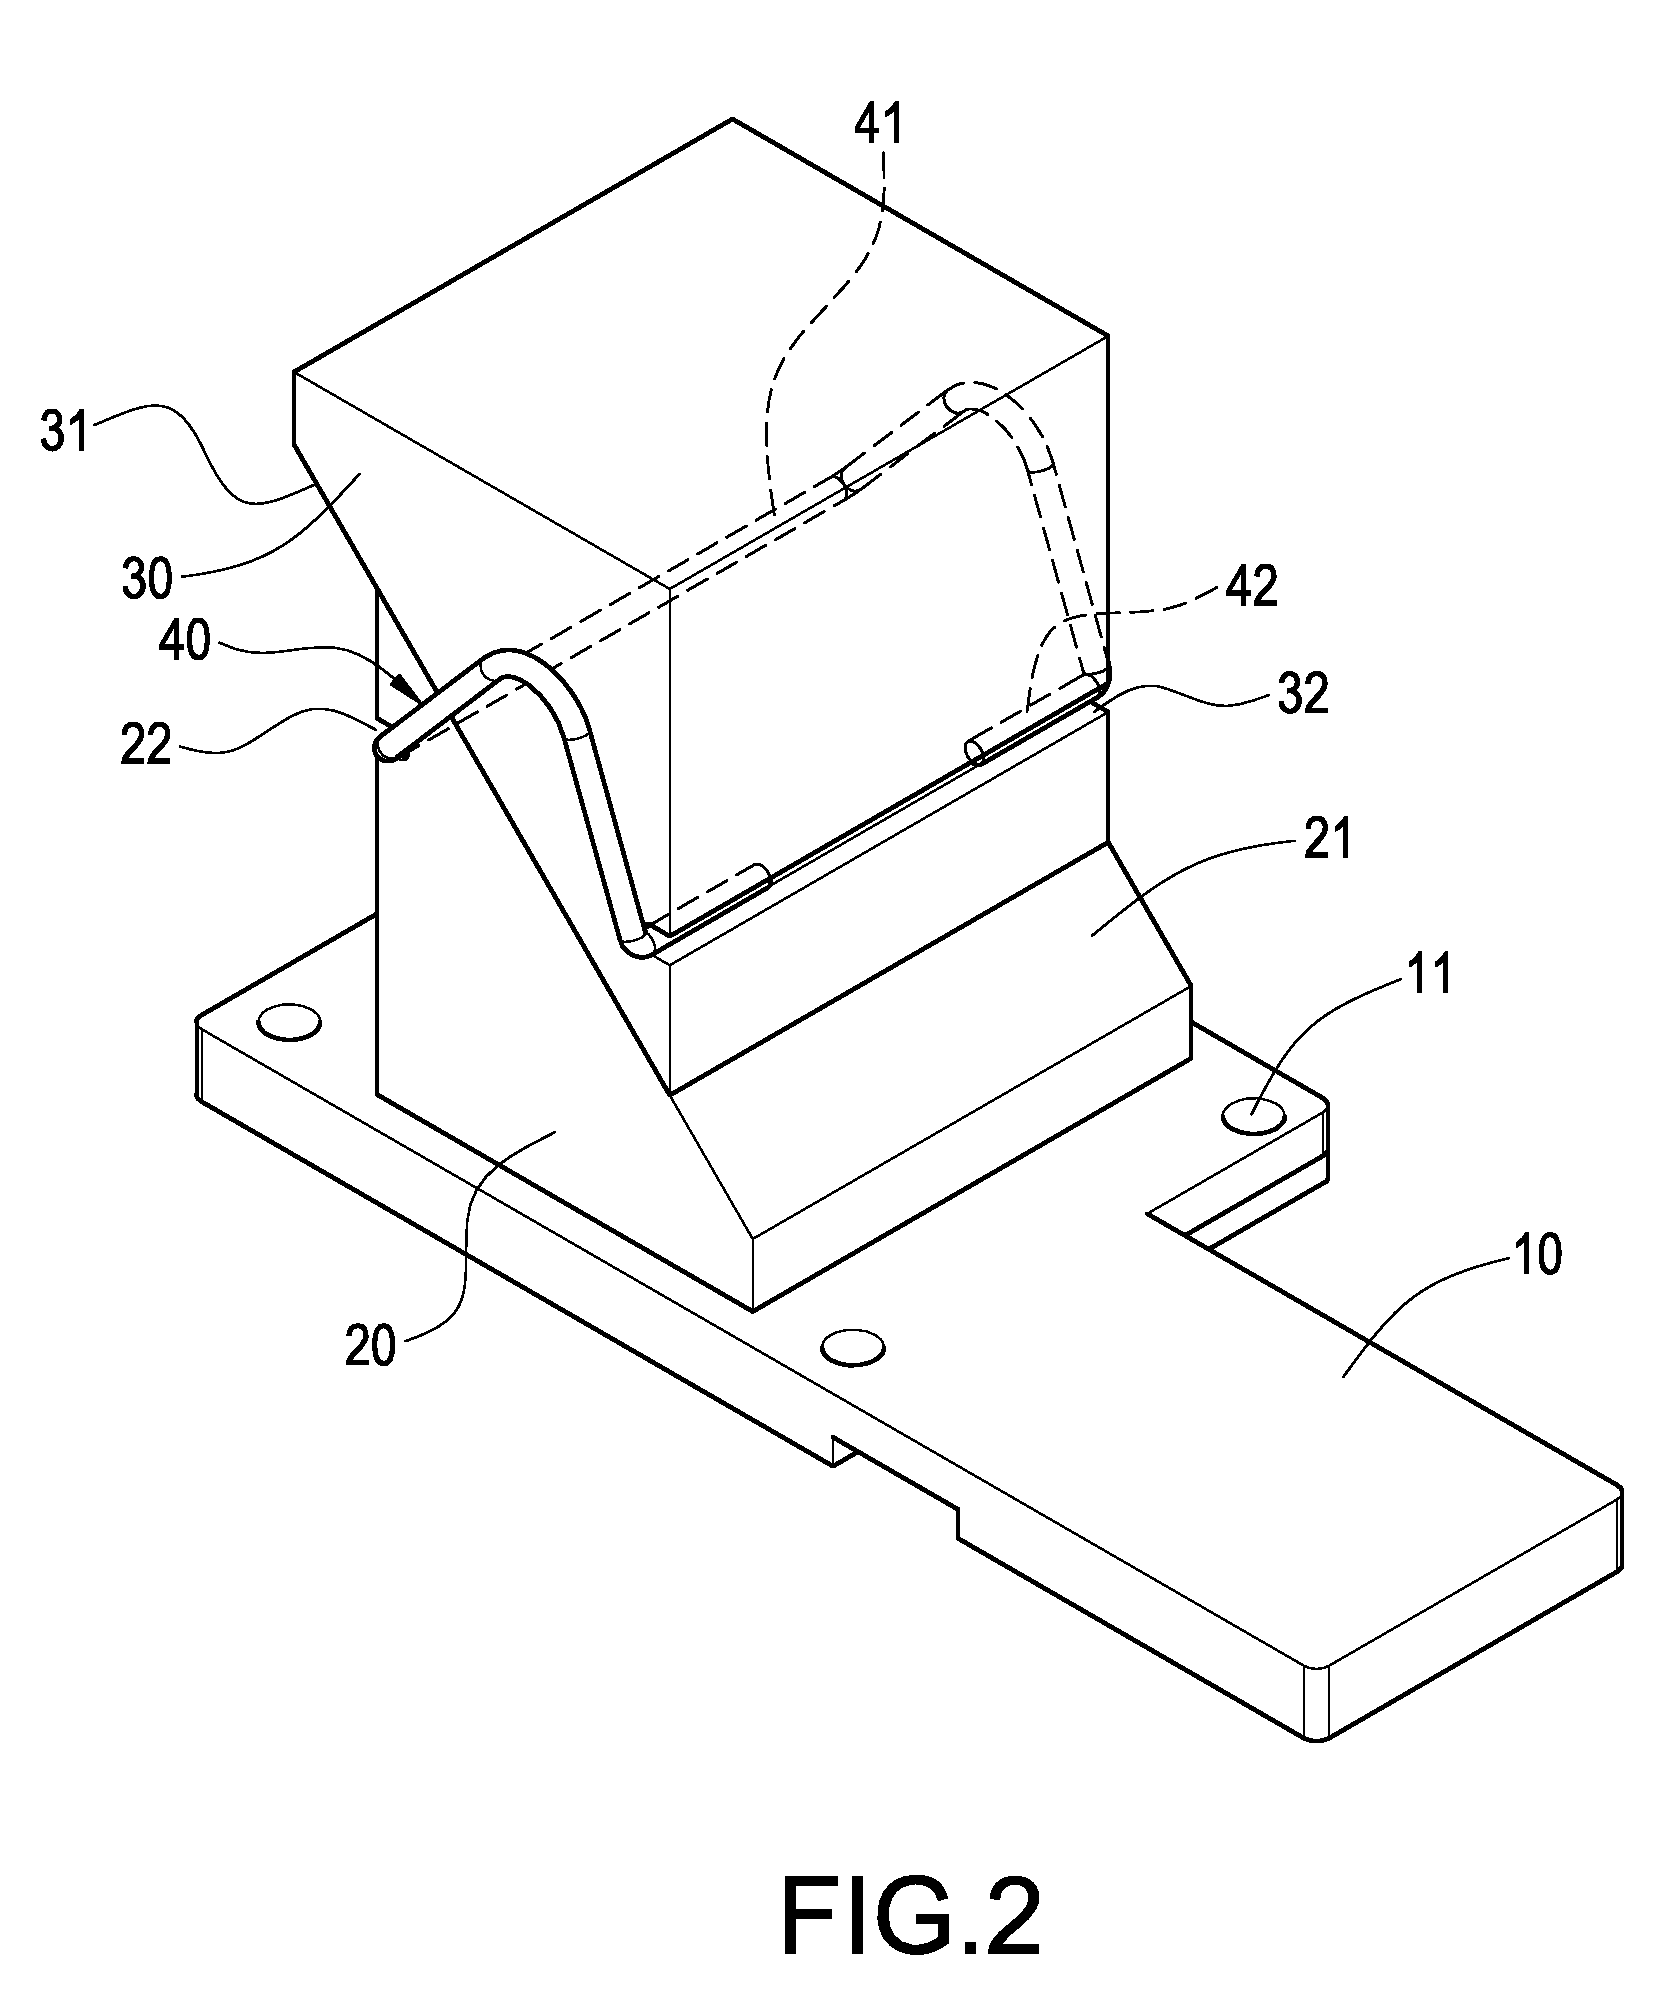 Heat-conducting assembly